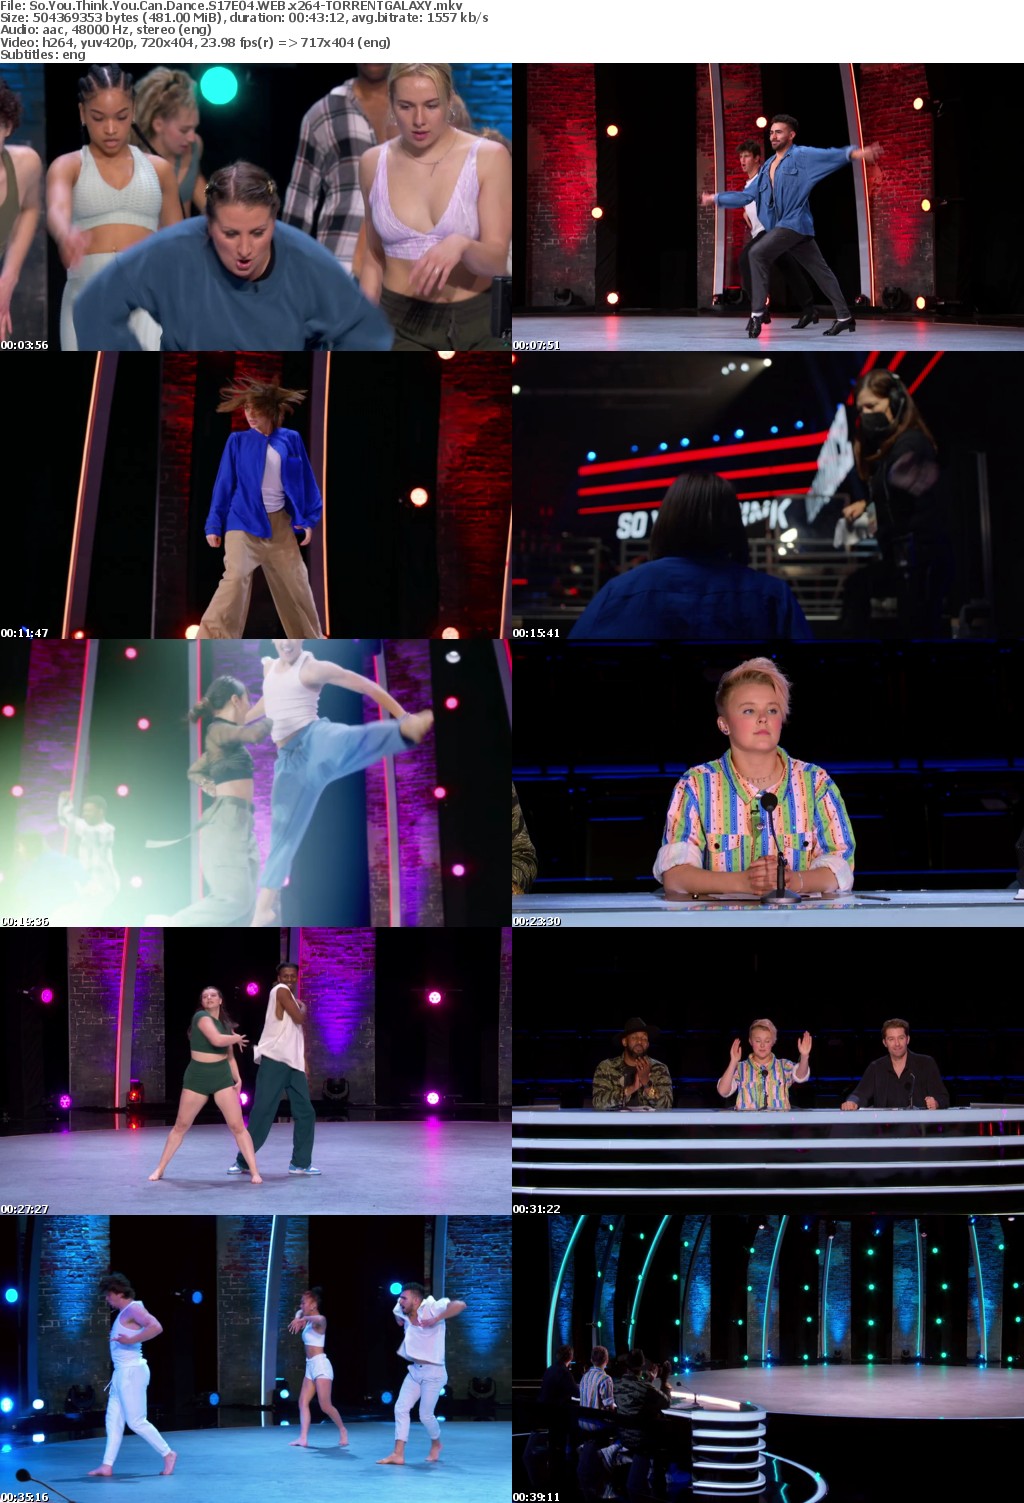 So You Think You Can Dance S17E04 WEB x264-GALAXY